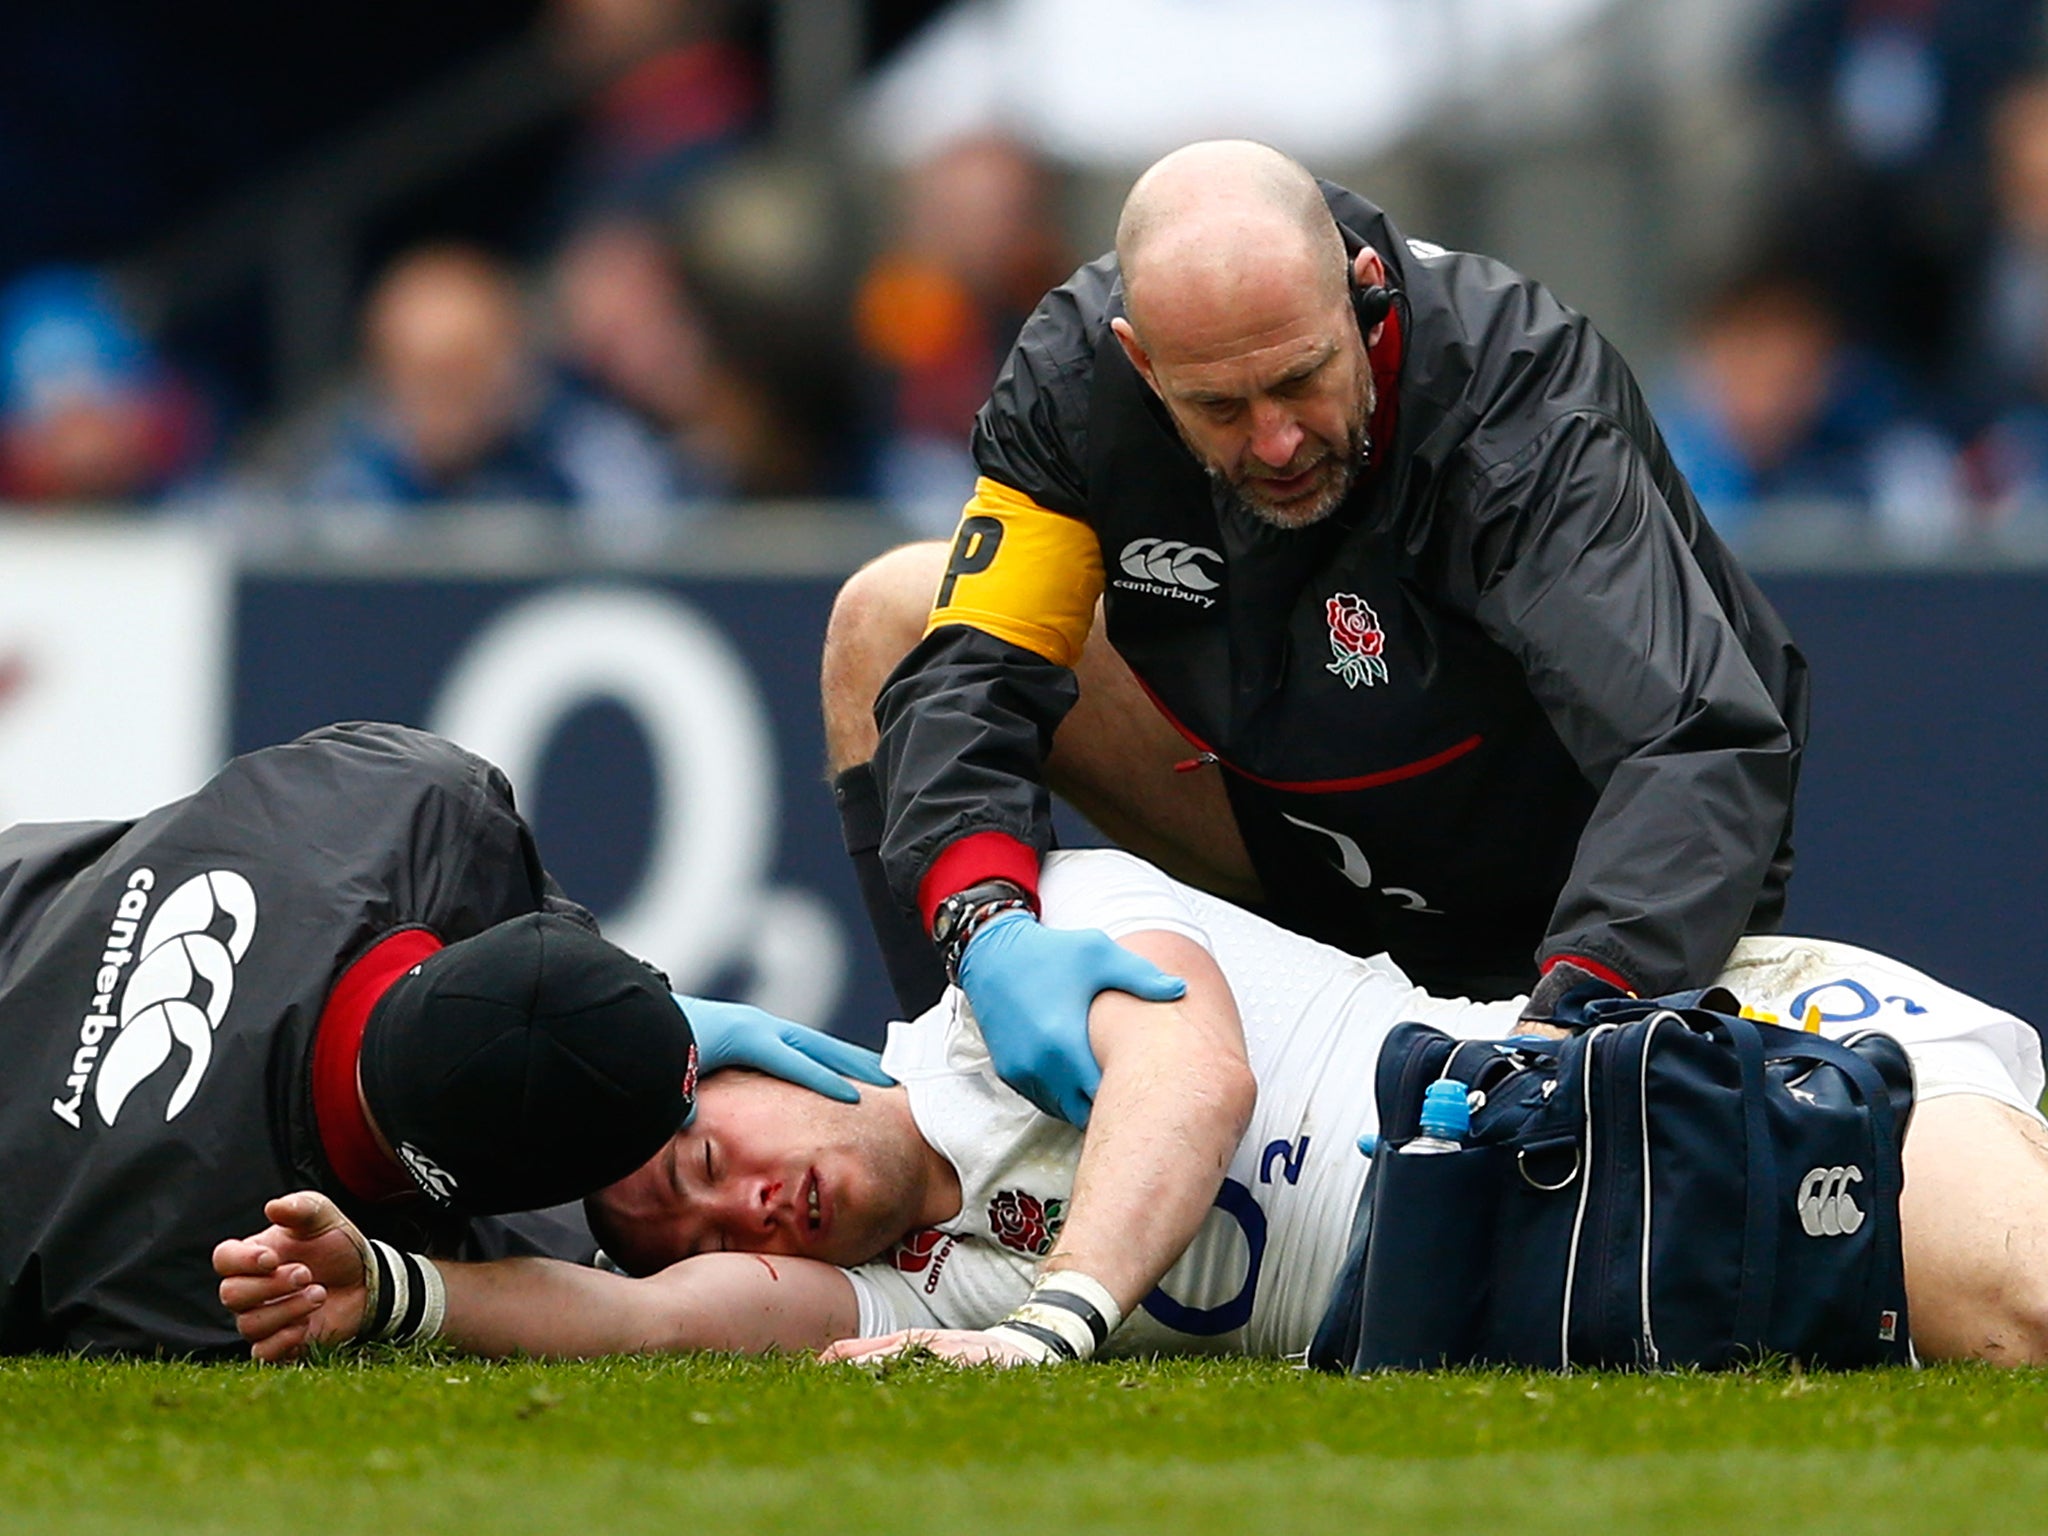 Mike Brown of England receives medical attention during the RBS Six Nations match between England and Italy at Twickenham